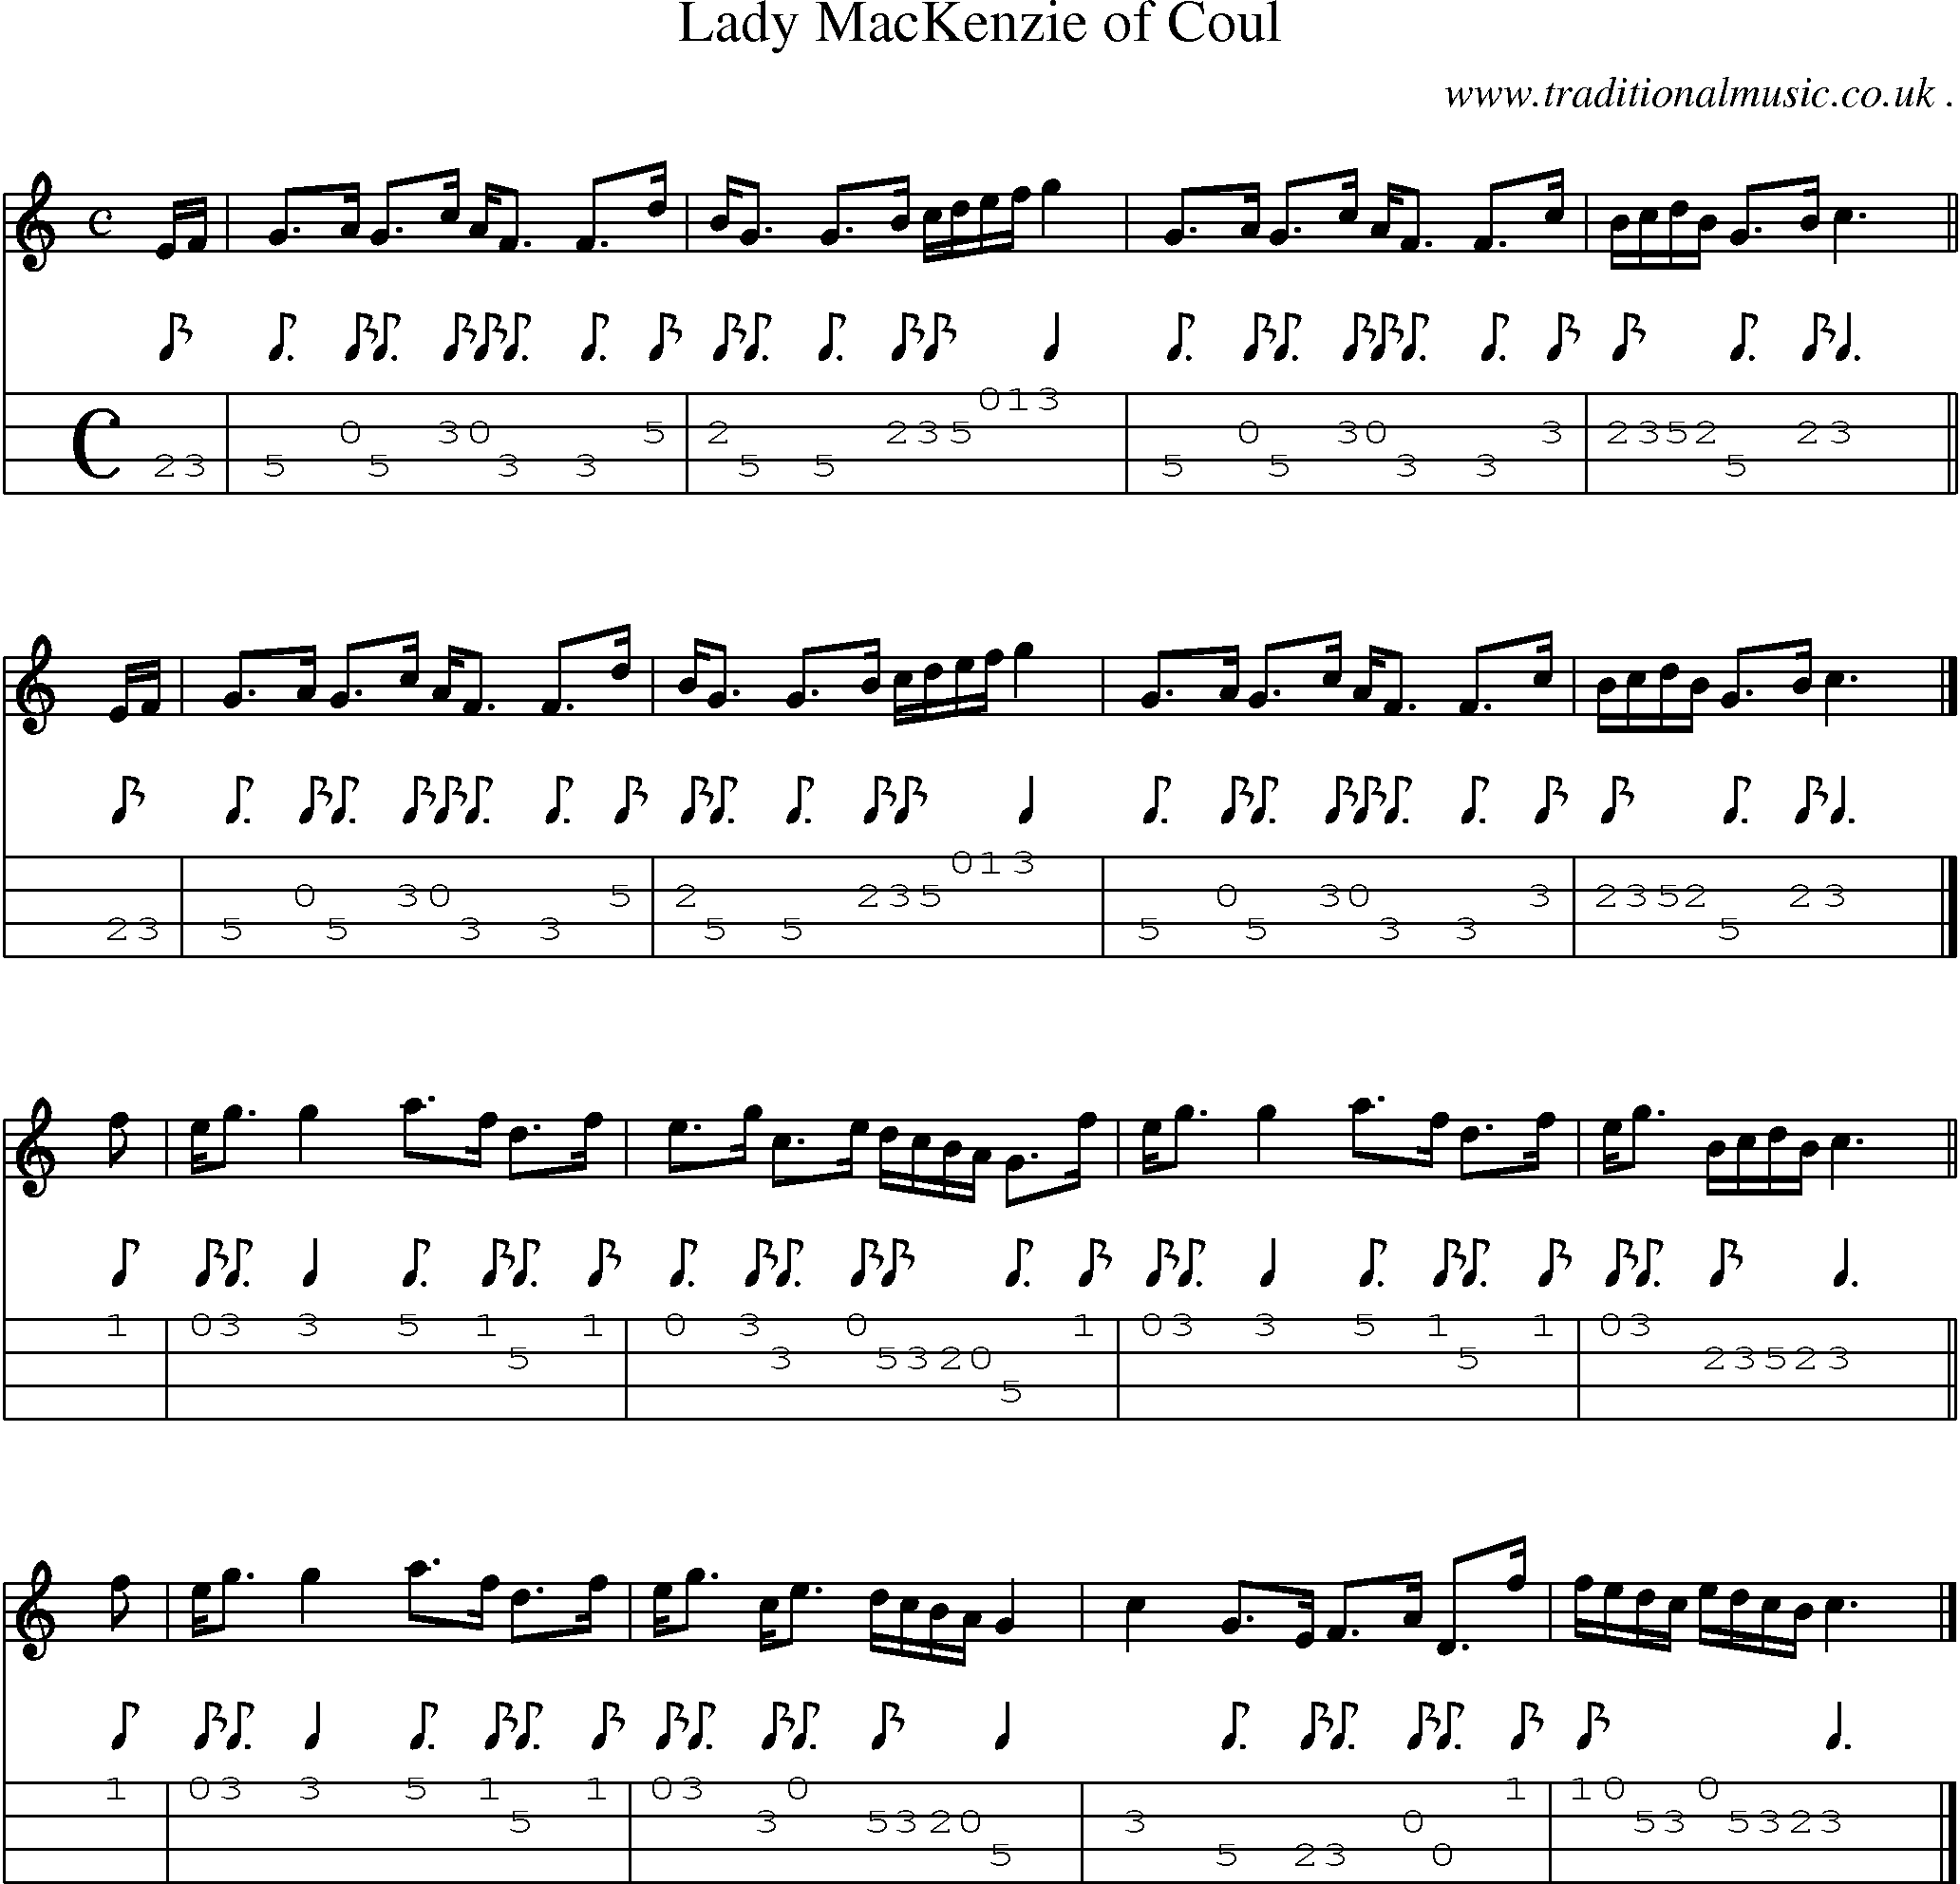 Sheet-music  score, Chords and Mandolin Tabs for Lady Mackenzie Of Coul